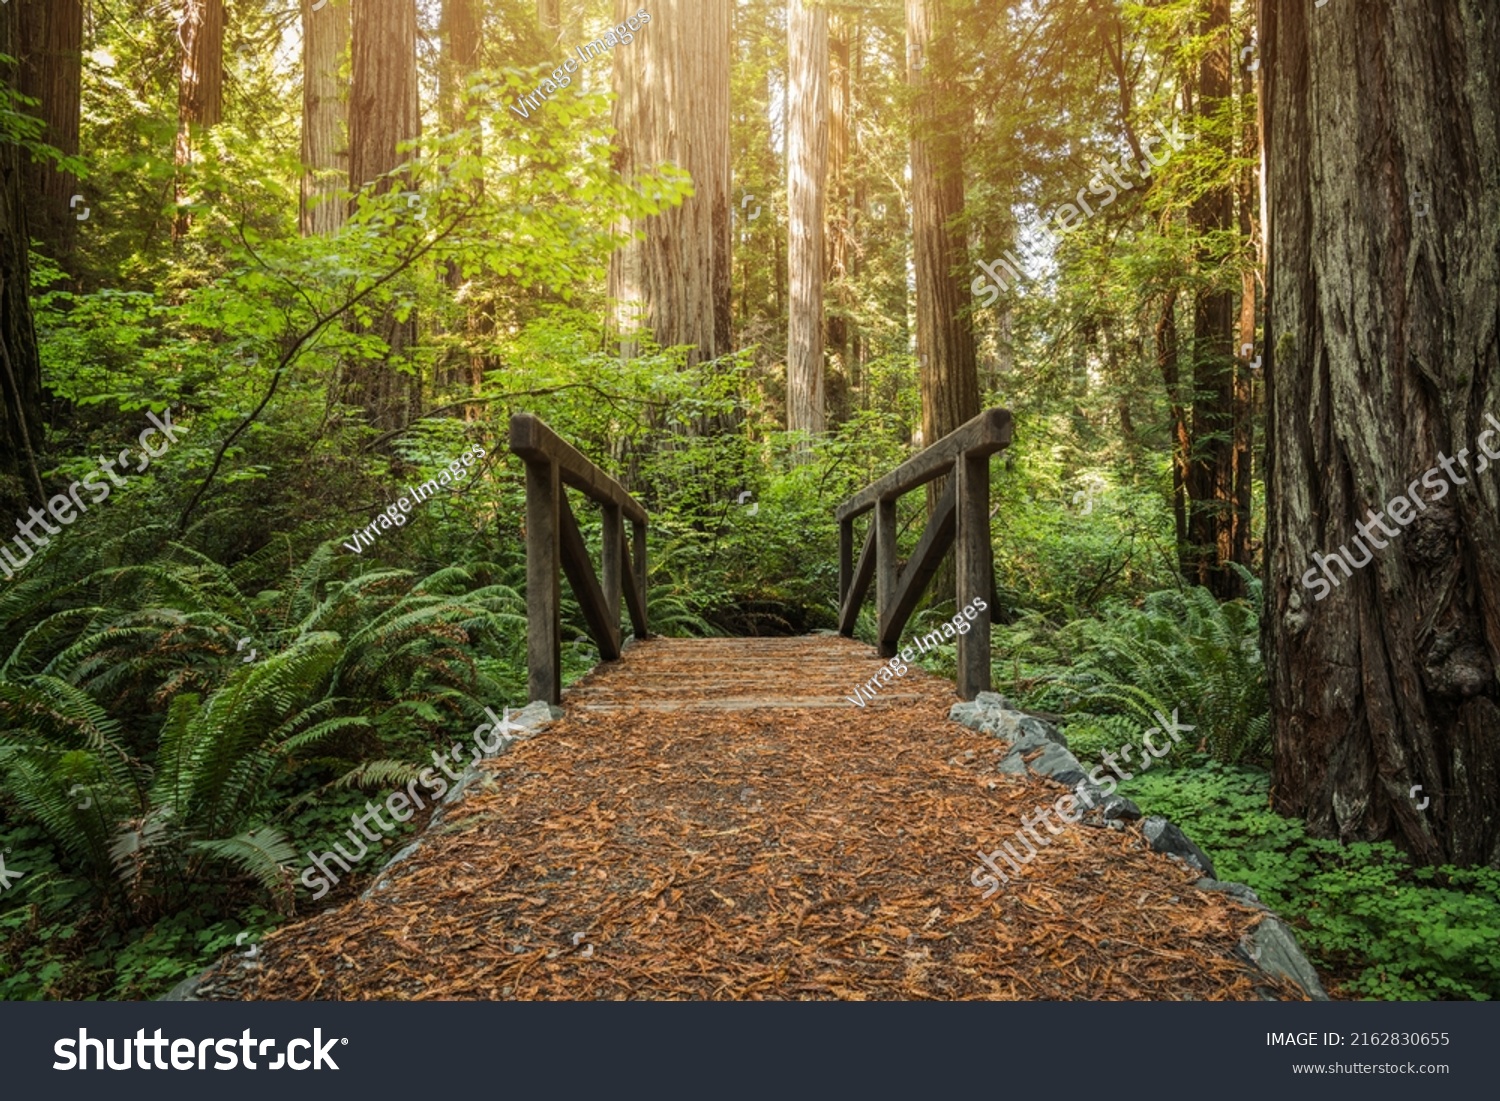 Small Wooden Creek Bridge on a Trail in the Redwood Ancient Forest. Coastal Northern California Landscape. #2162830655